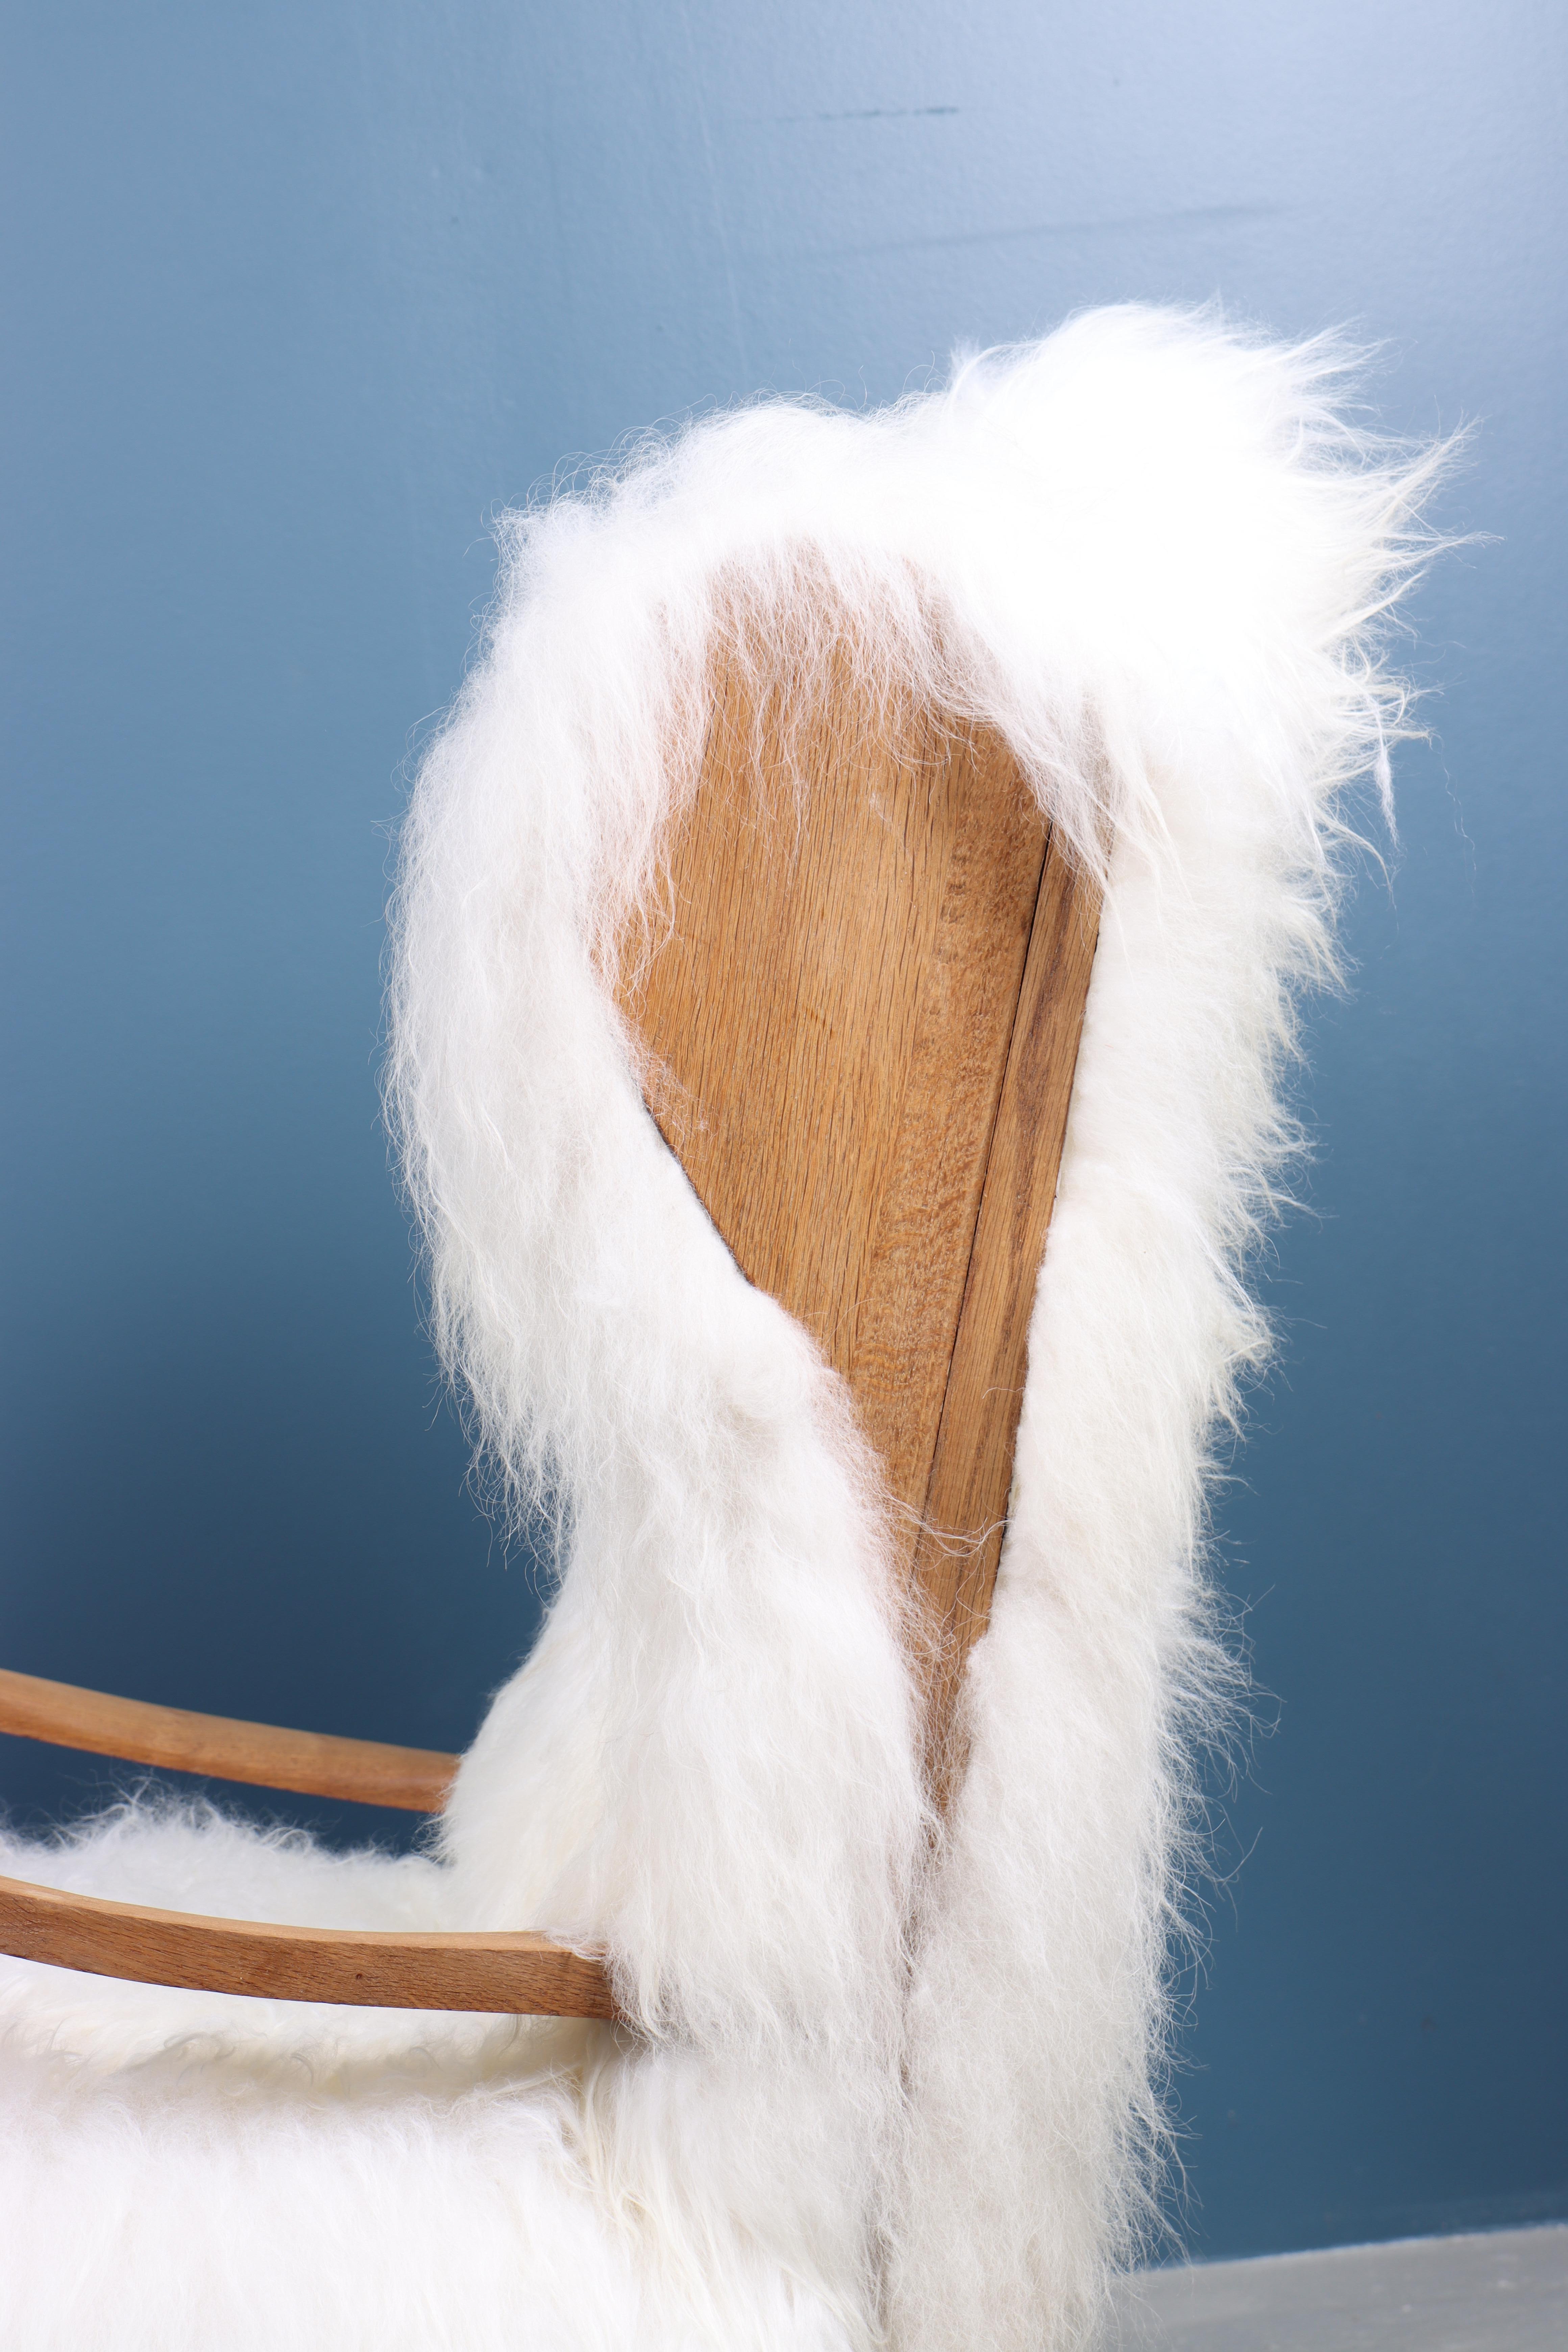 Danish Wingback Chair with Sheepskin, 1940s For Sale 1